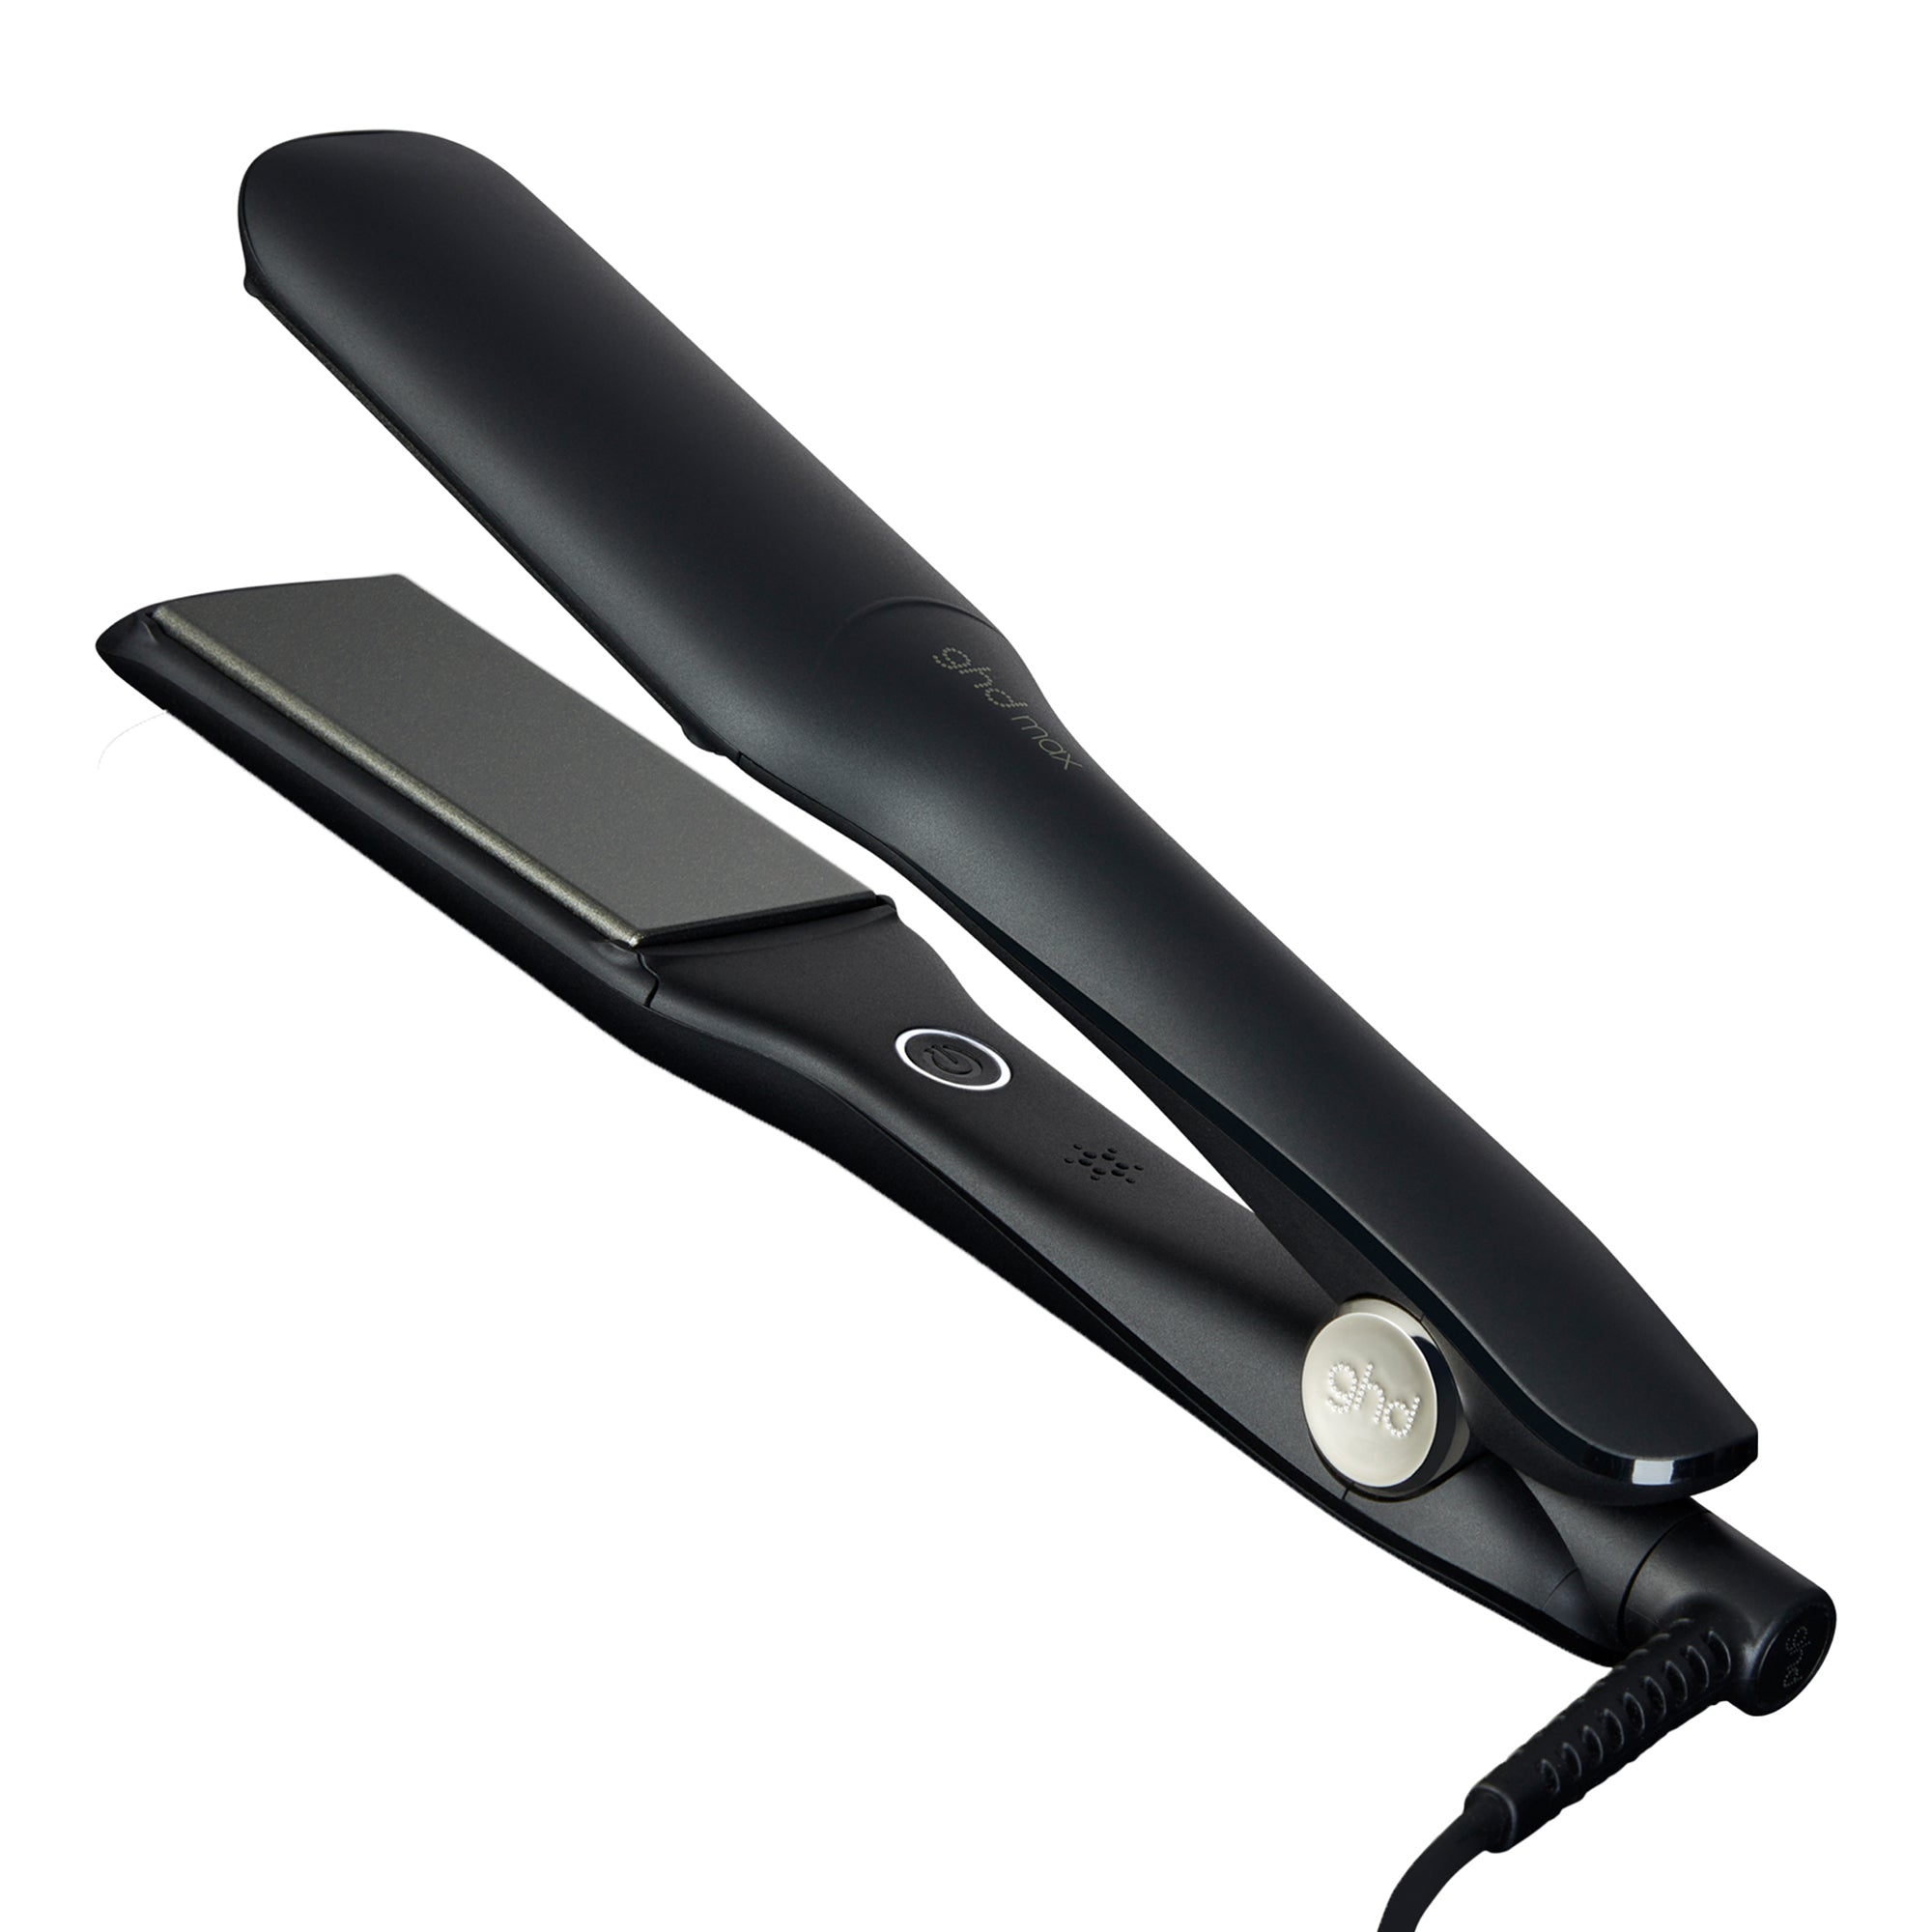 How To Use A Hair Straightener At Home   Times of India